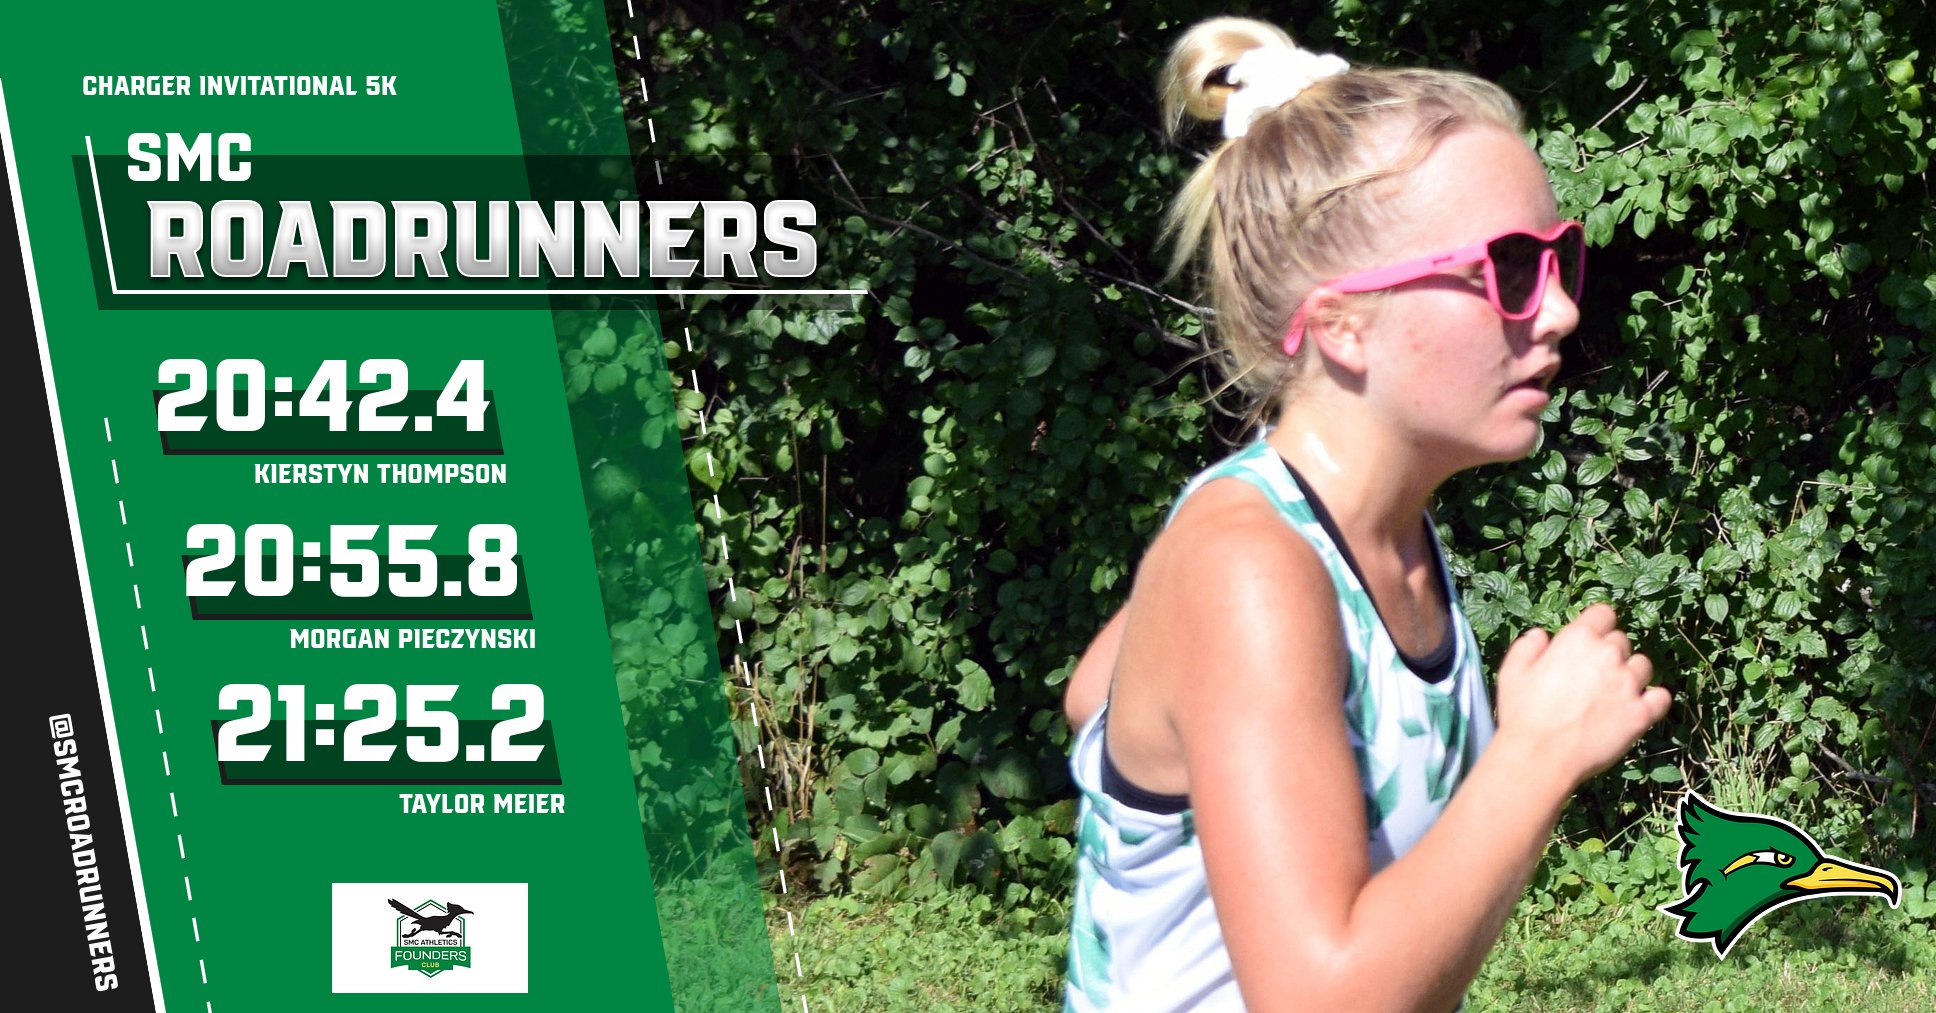 Women's CC Second at Charger Invitational